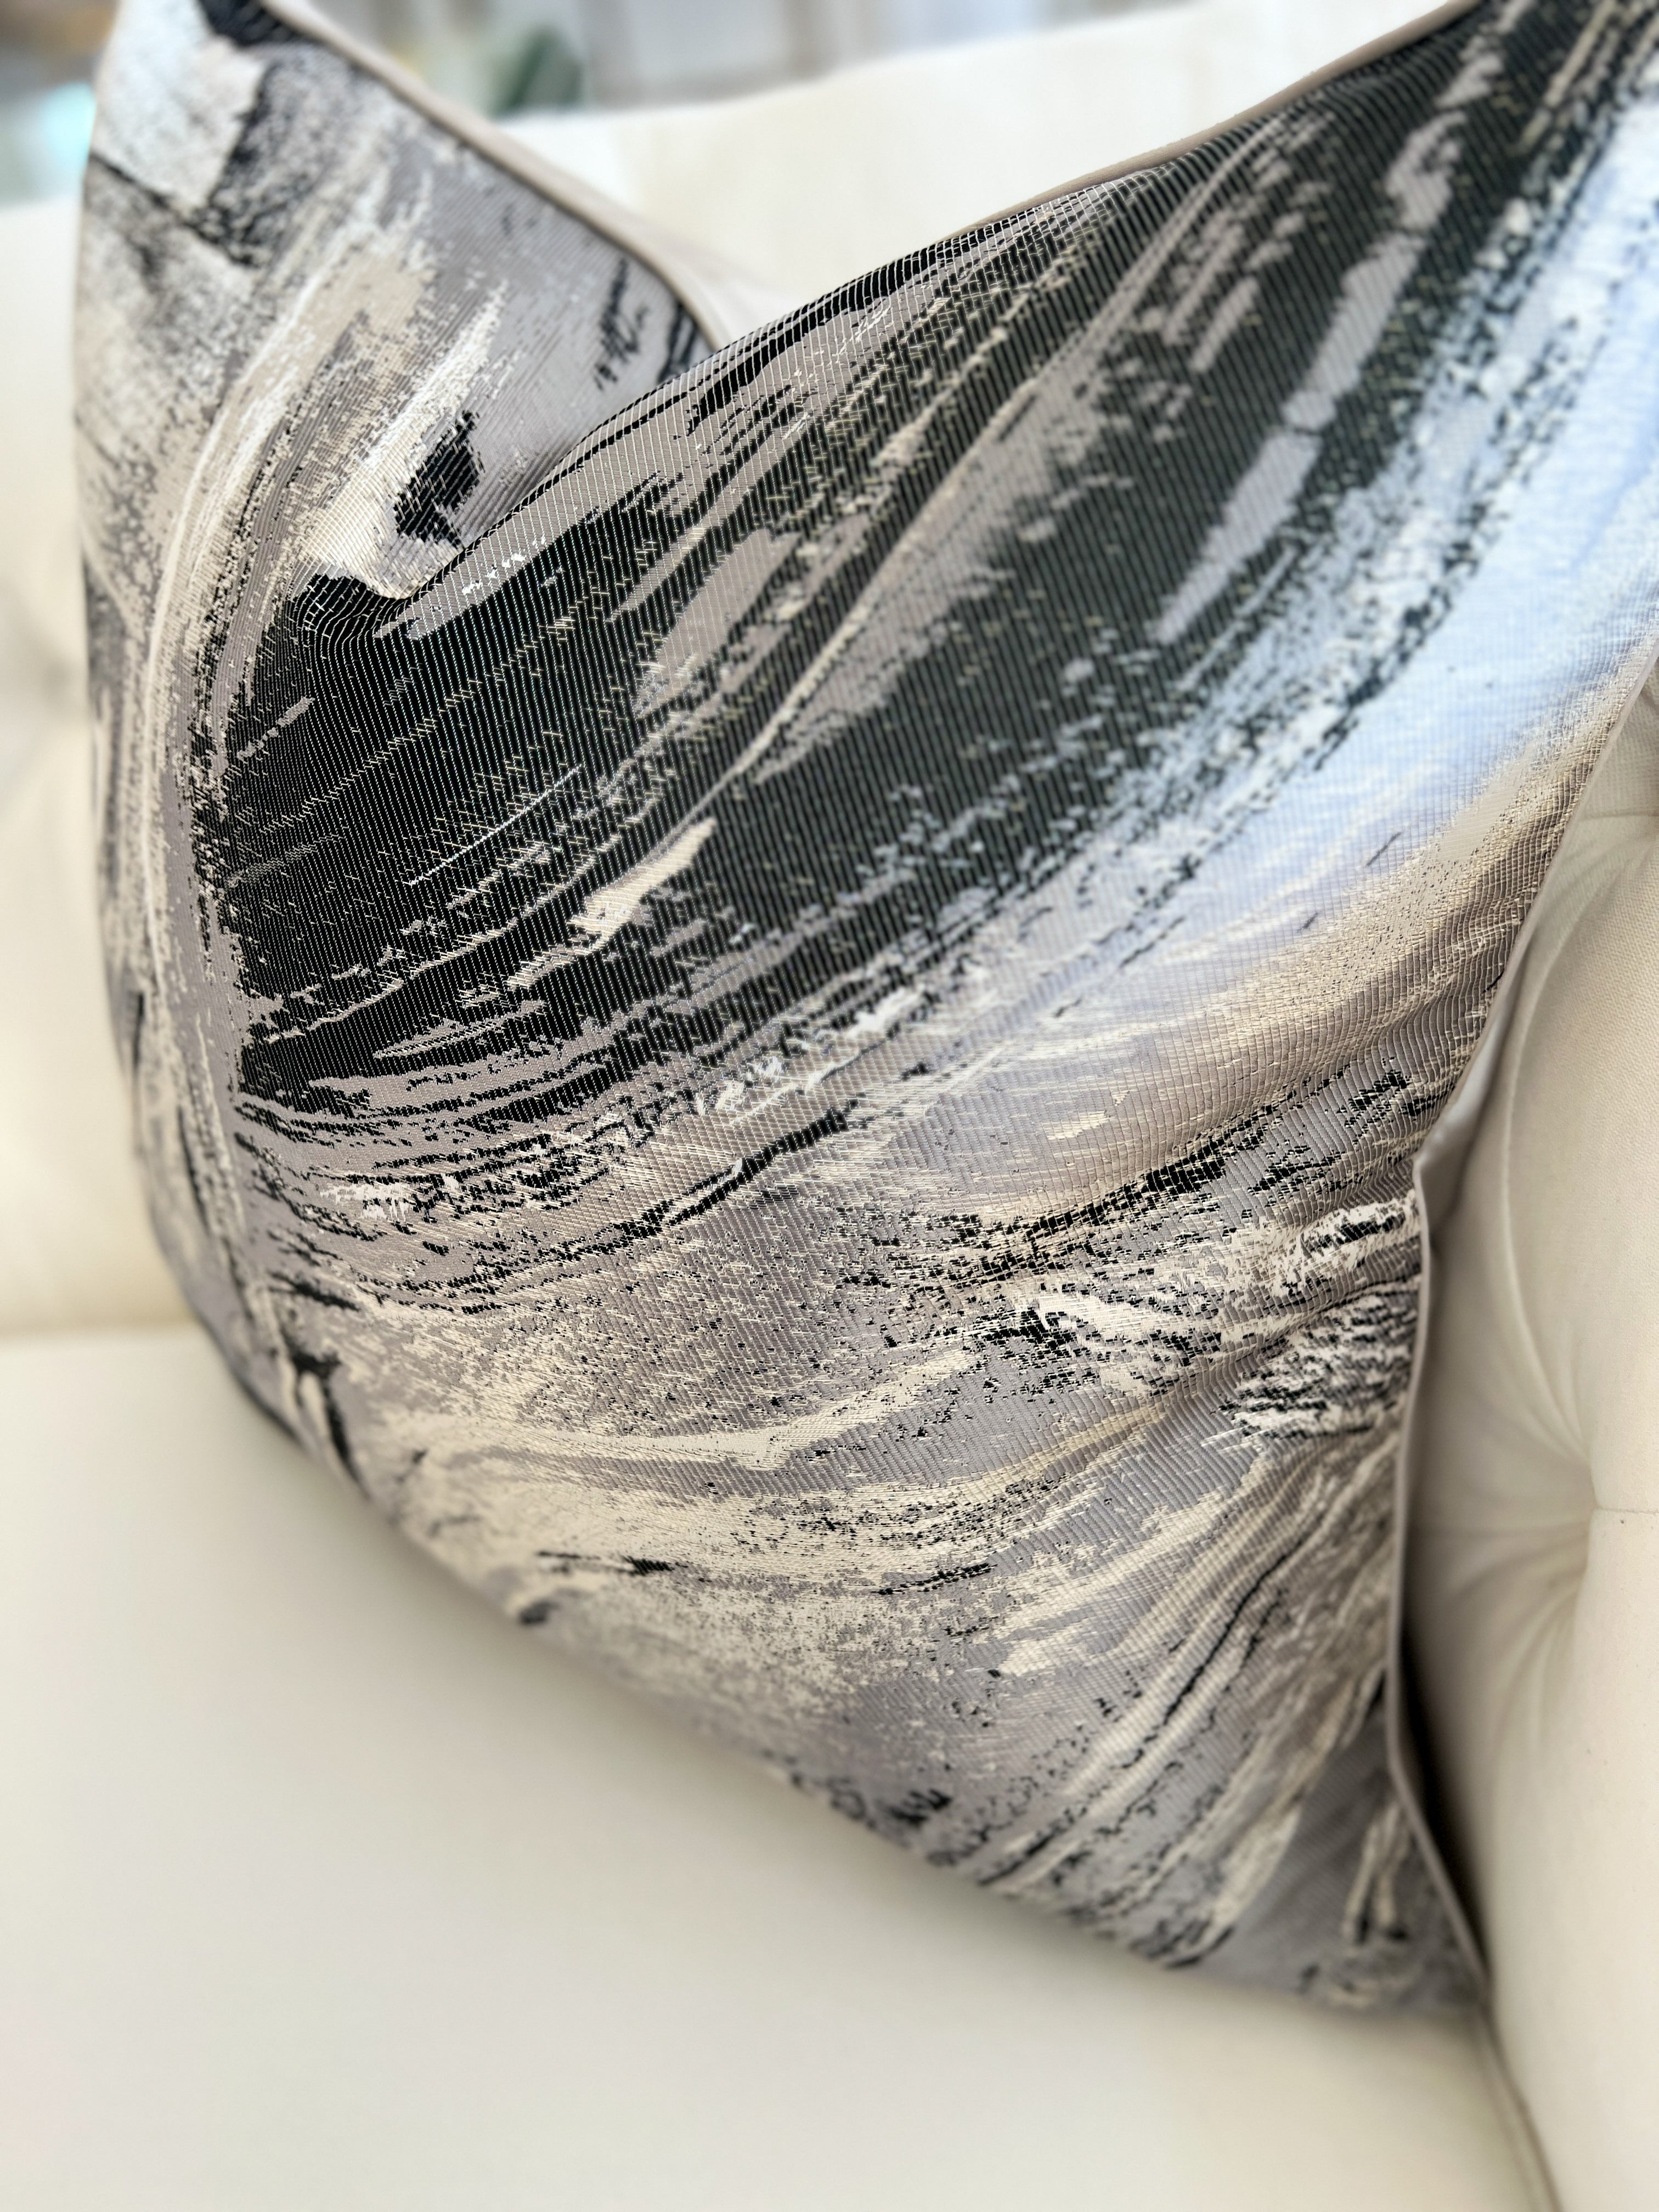 Black and Gray Waves Pattern Throw Pillow Cover